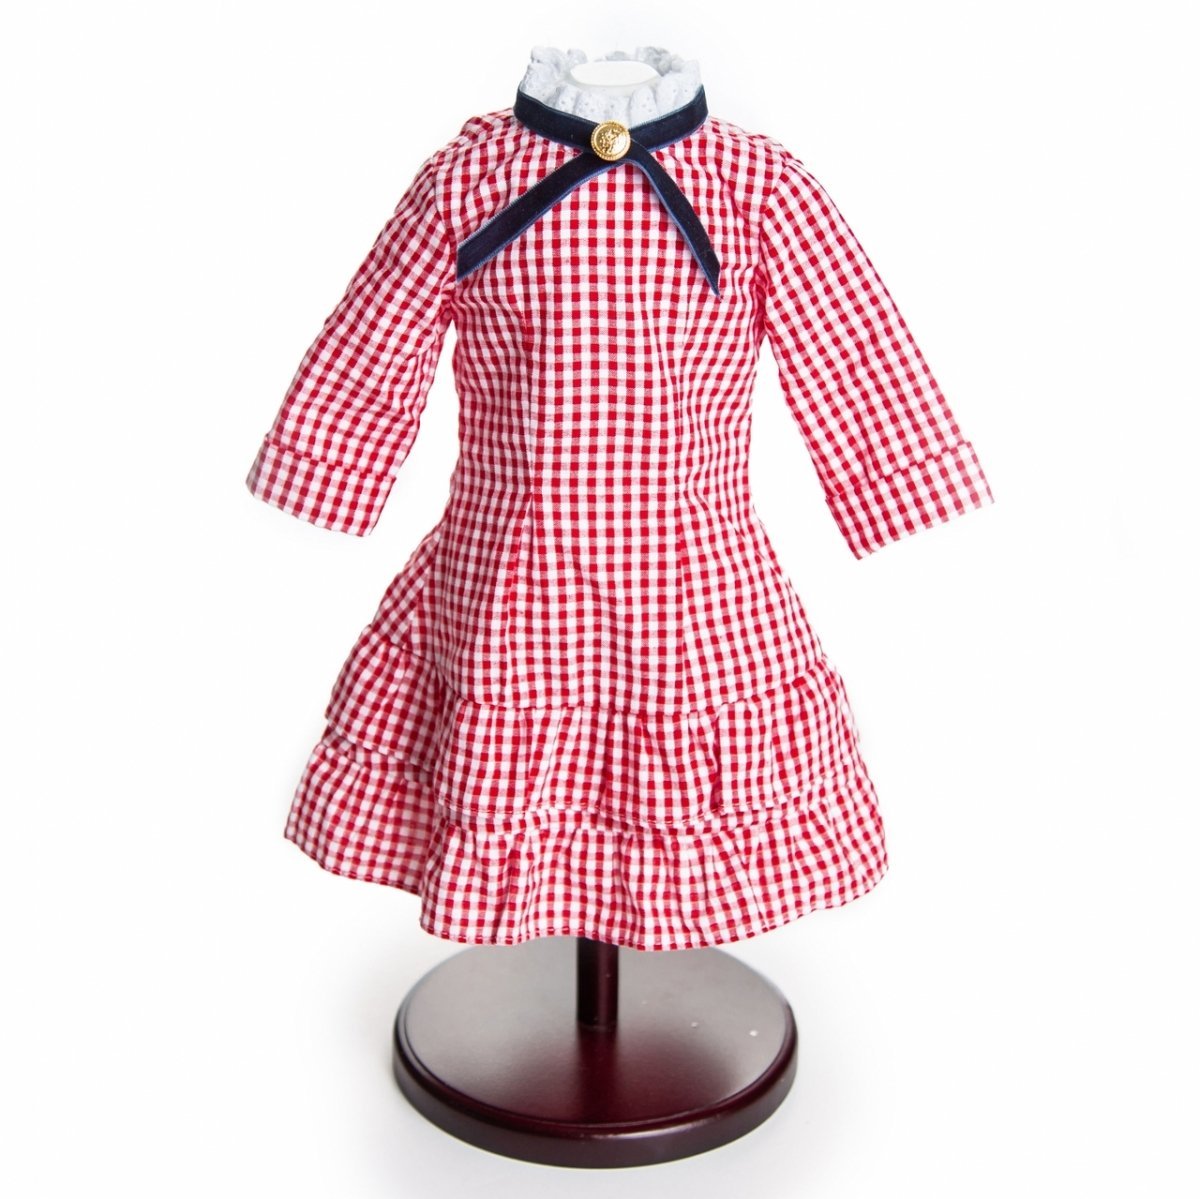 Little House On The Prairie Red Check Dress, Clothes for 18 Inch Dolls - Simon's Collectibles